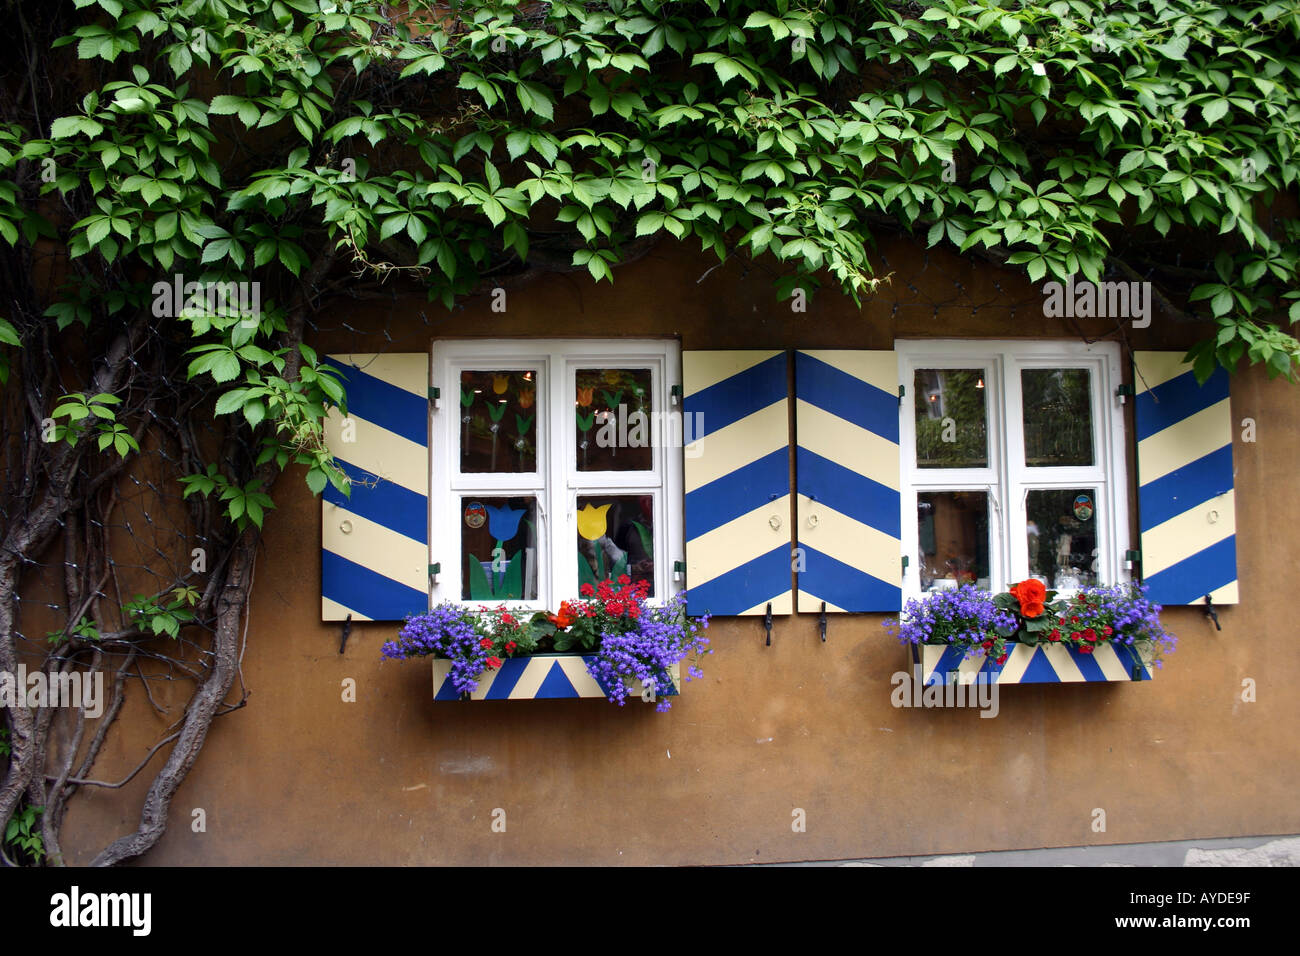 The Fuggerei oldest social settlement in the world Augsburg Bavaria Germany house embraced by vines Stock Photo